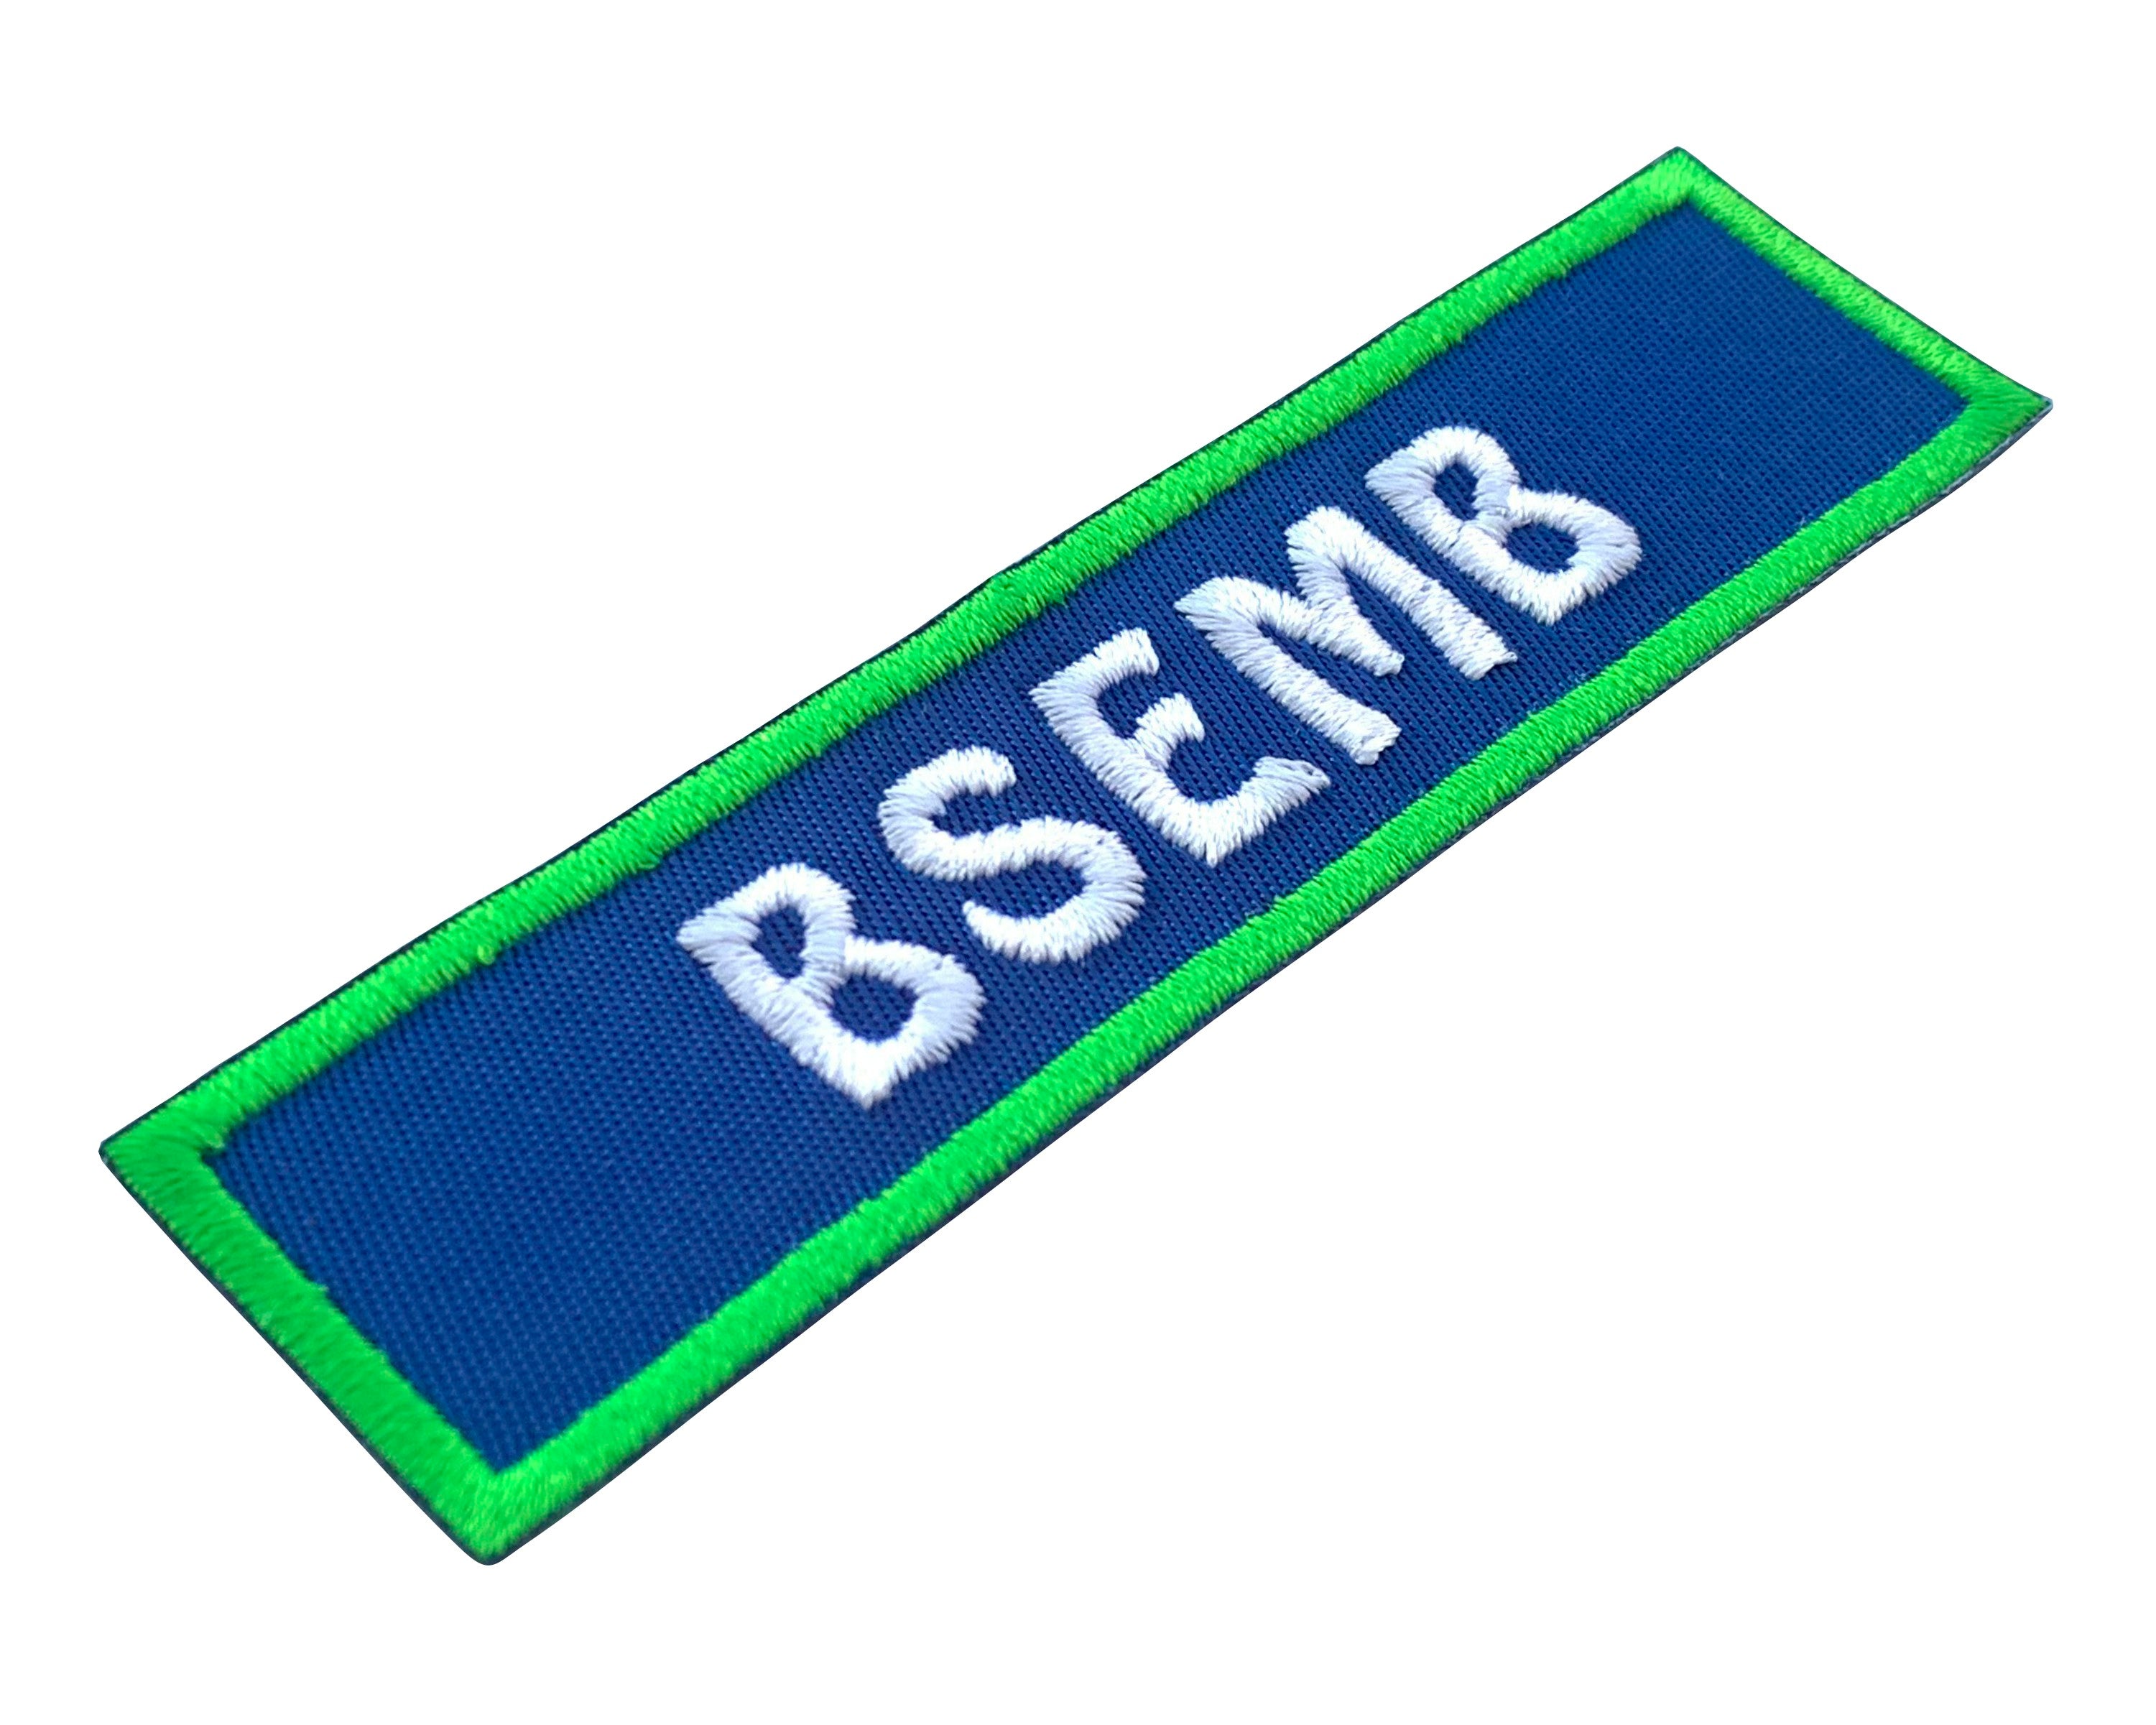 1 X 4 Custom 3M Reflective Name Patch - Iron on or with VELCRO® Brand –  Bull Shoals Embroidery